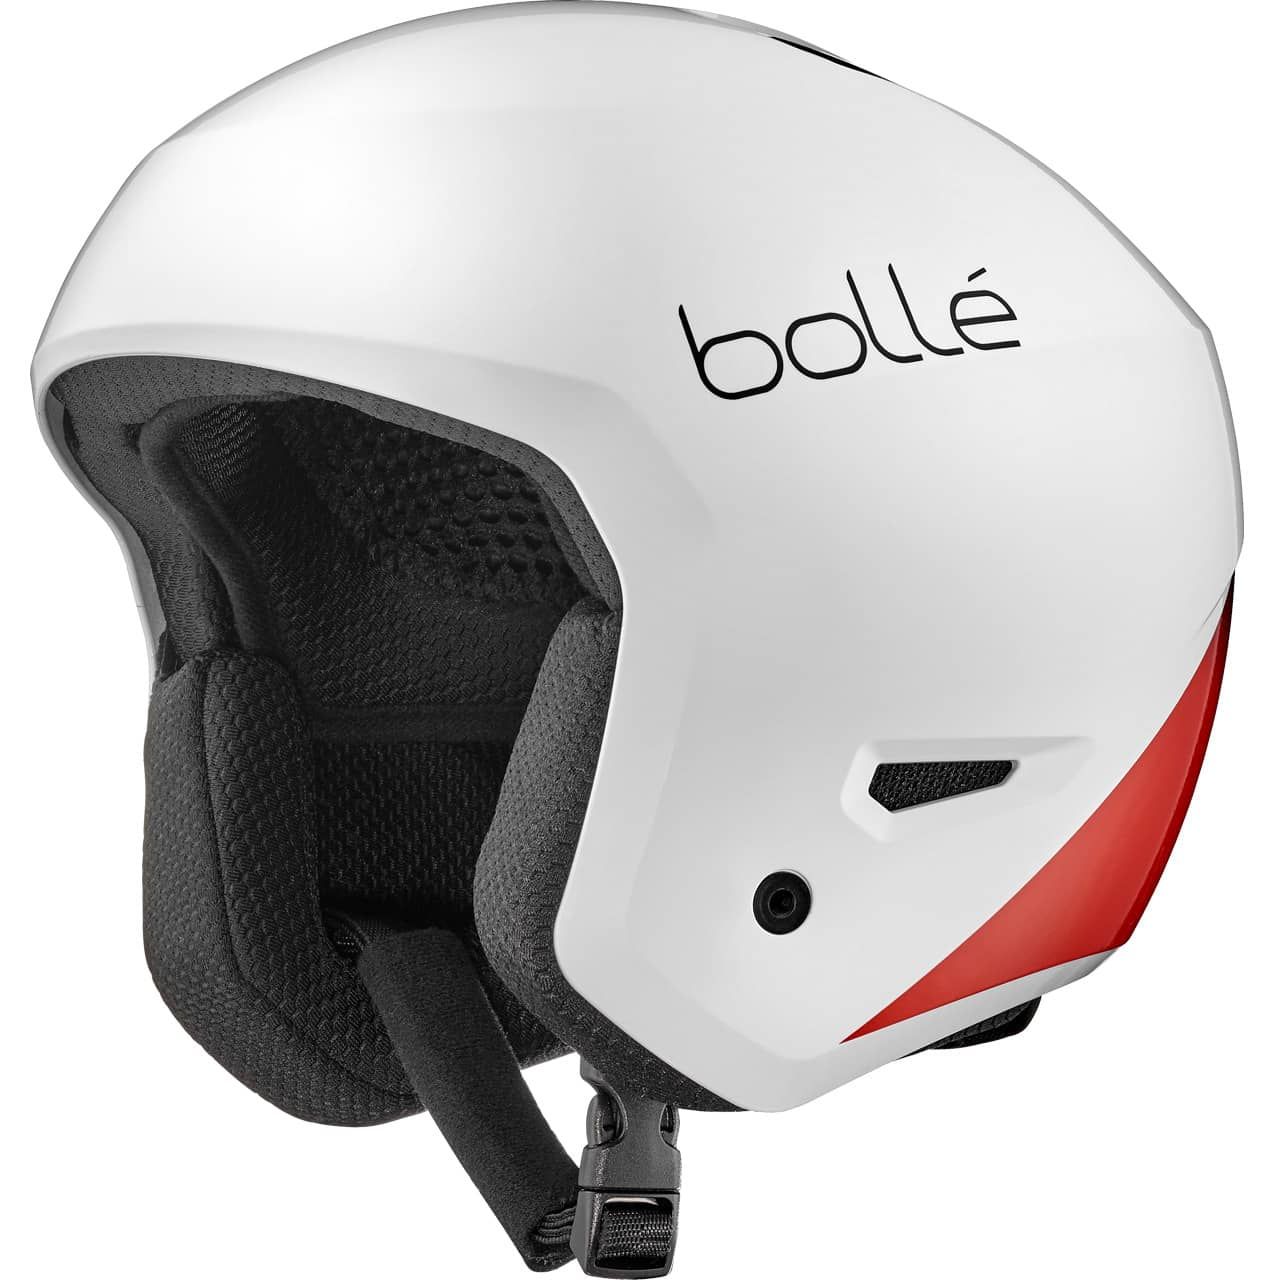 Bolle Medalist Pure white/black/red shiny von Bolle